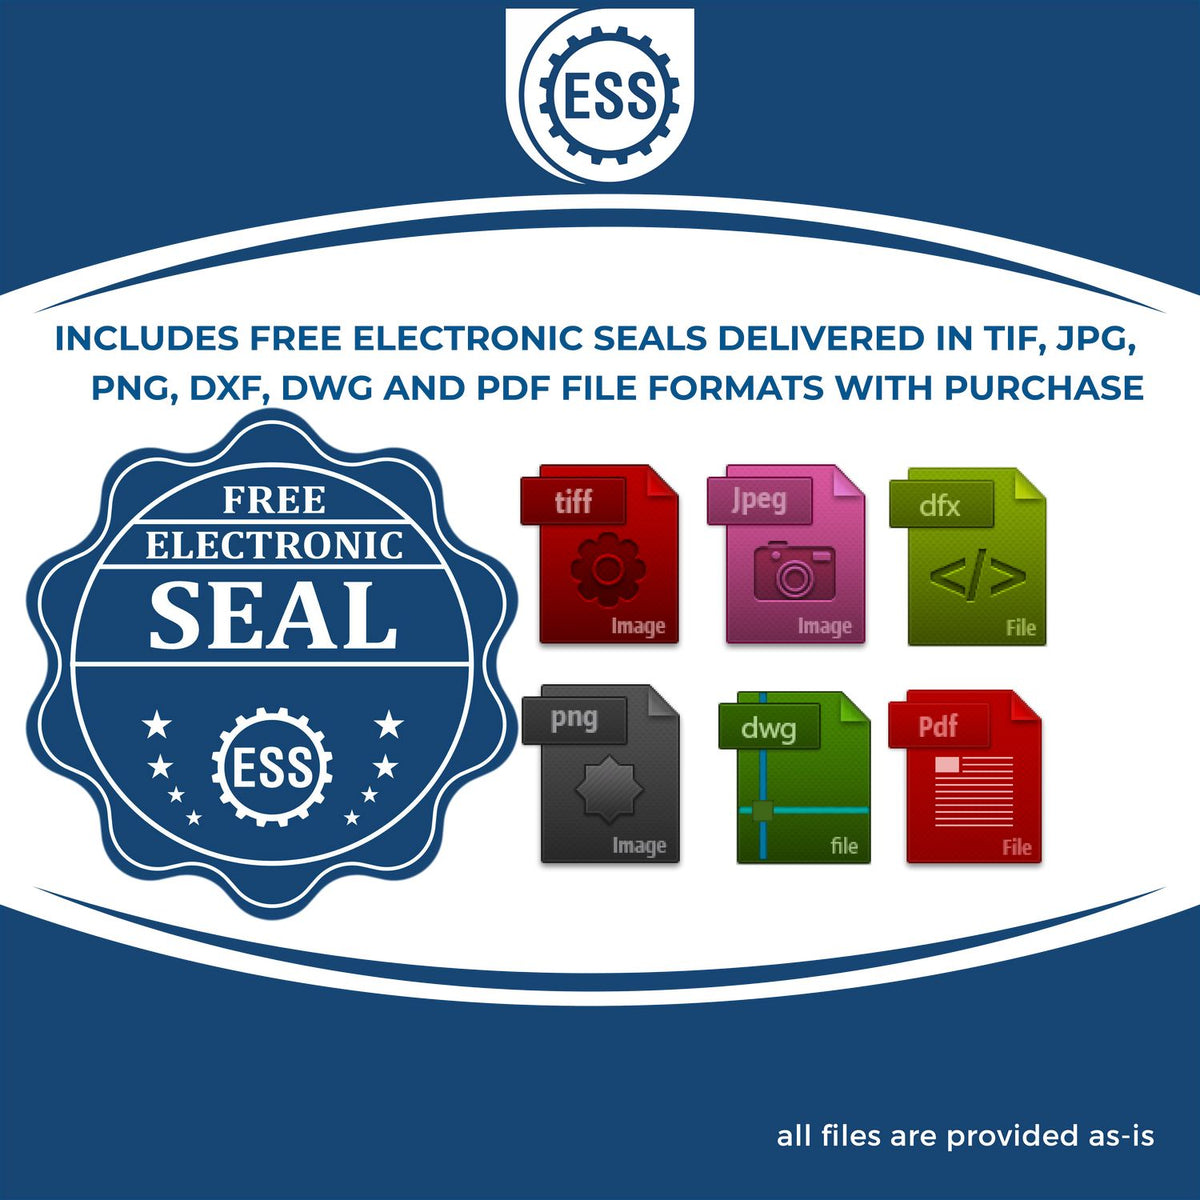 An infographic for the free electronic seal for the Slim Pre-Inked Rhode Island Professional Geologist Seal Stamp illustrating the different file type icons such as DXF, DWG, TIF, JPG and PNG.